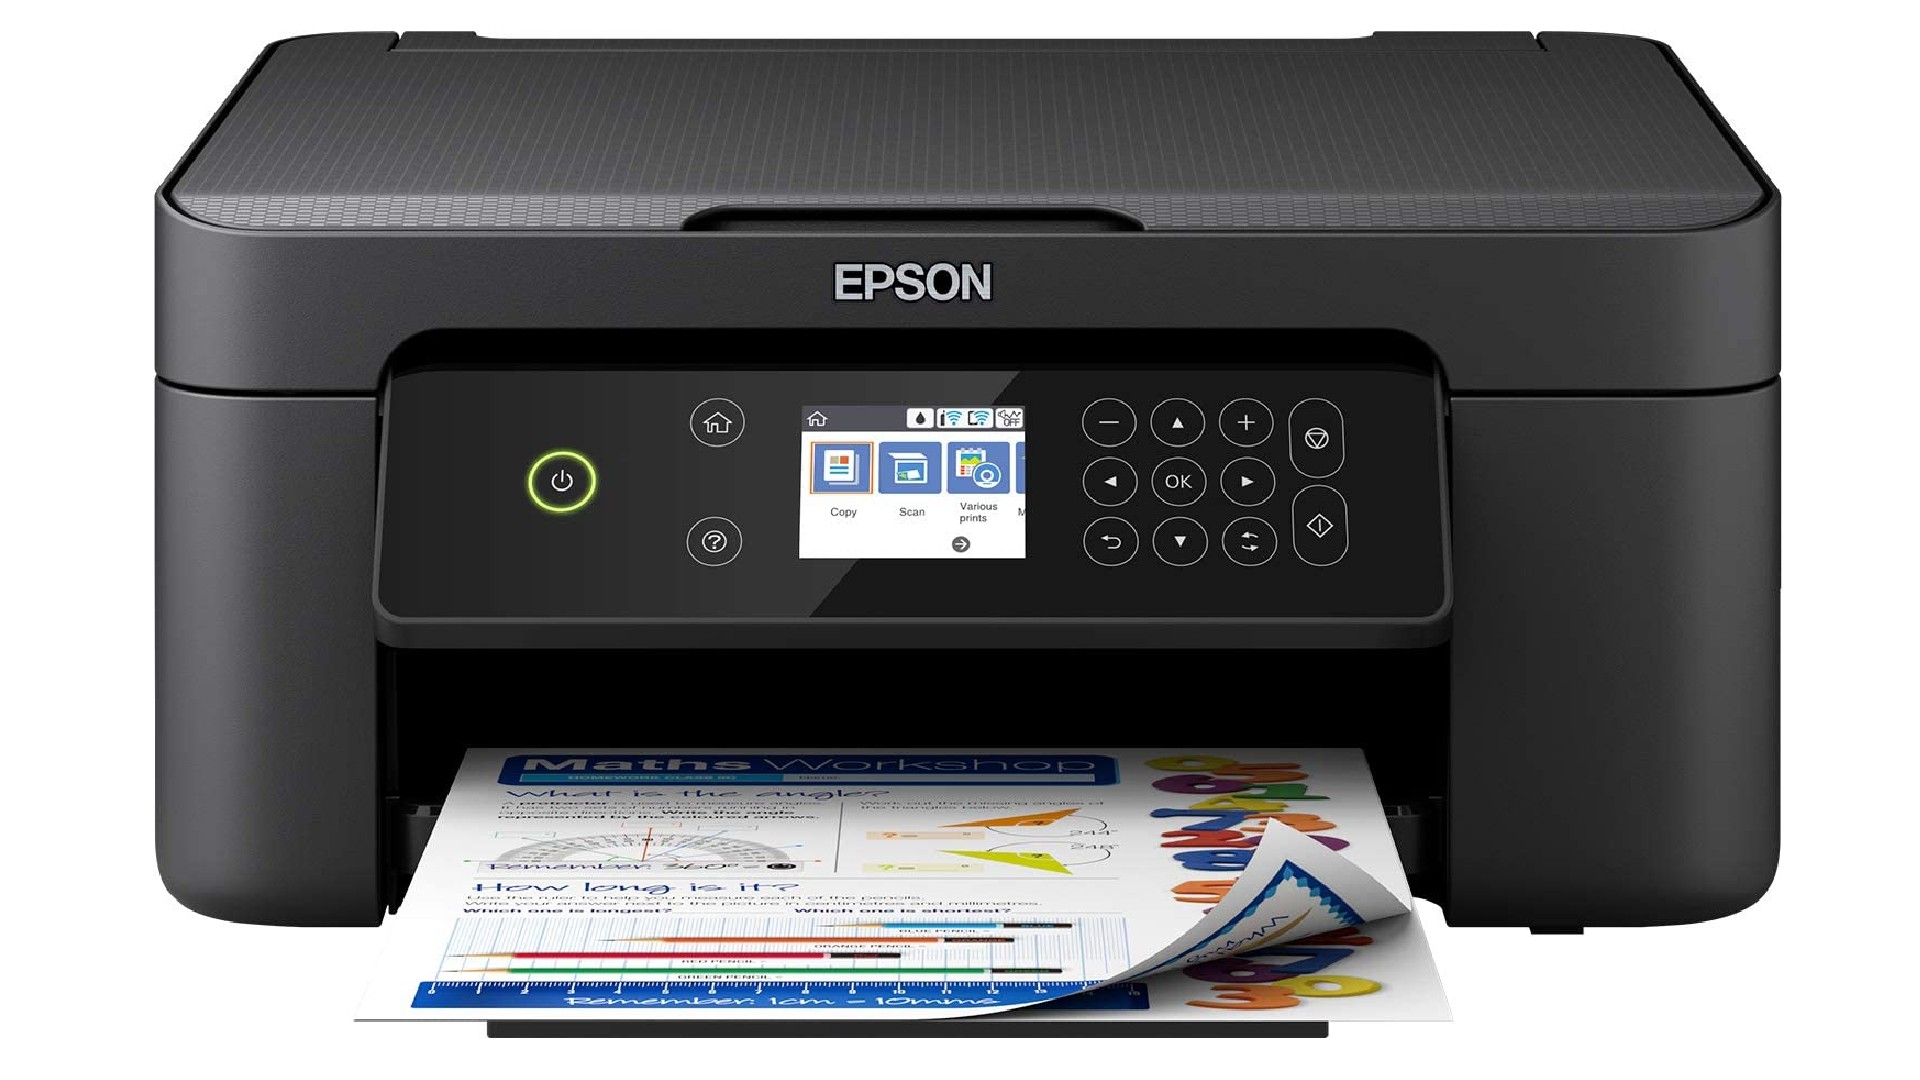 Product shot of Epson Expression Home XP-4100, one of the best budget printers